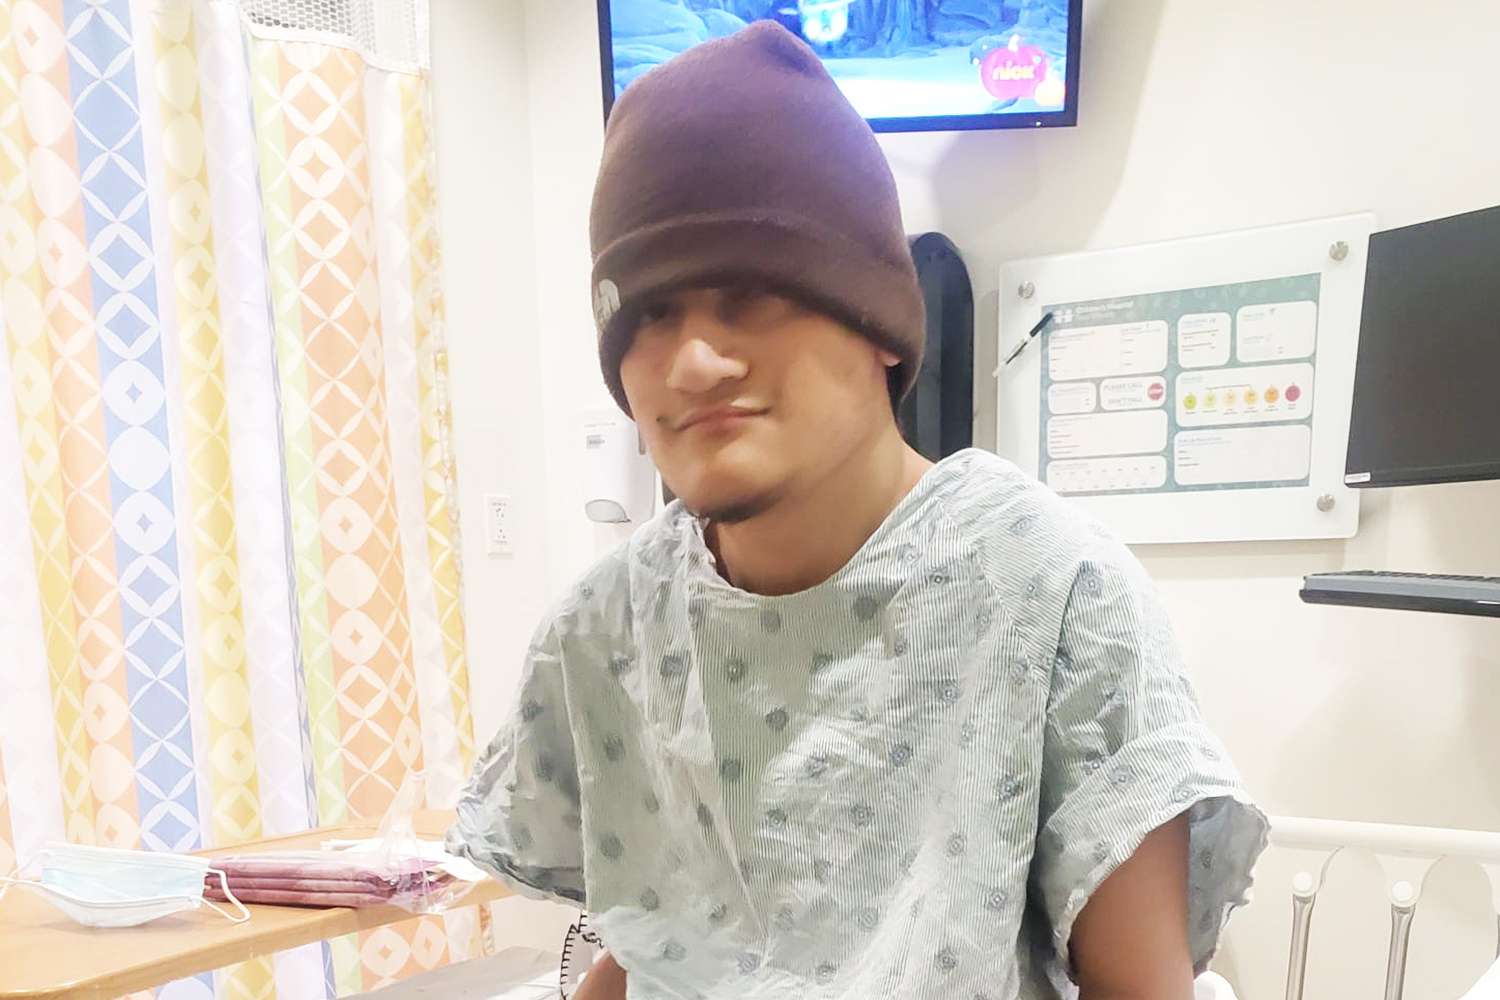 Louisiana Teen Diagnosed with Rare Cancer in His Testicle: 'Something Wasn't Right' (Exclusive)